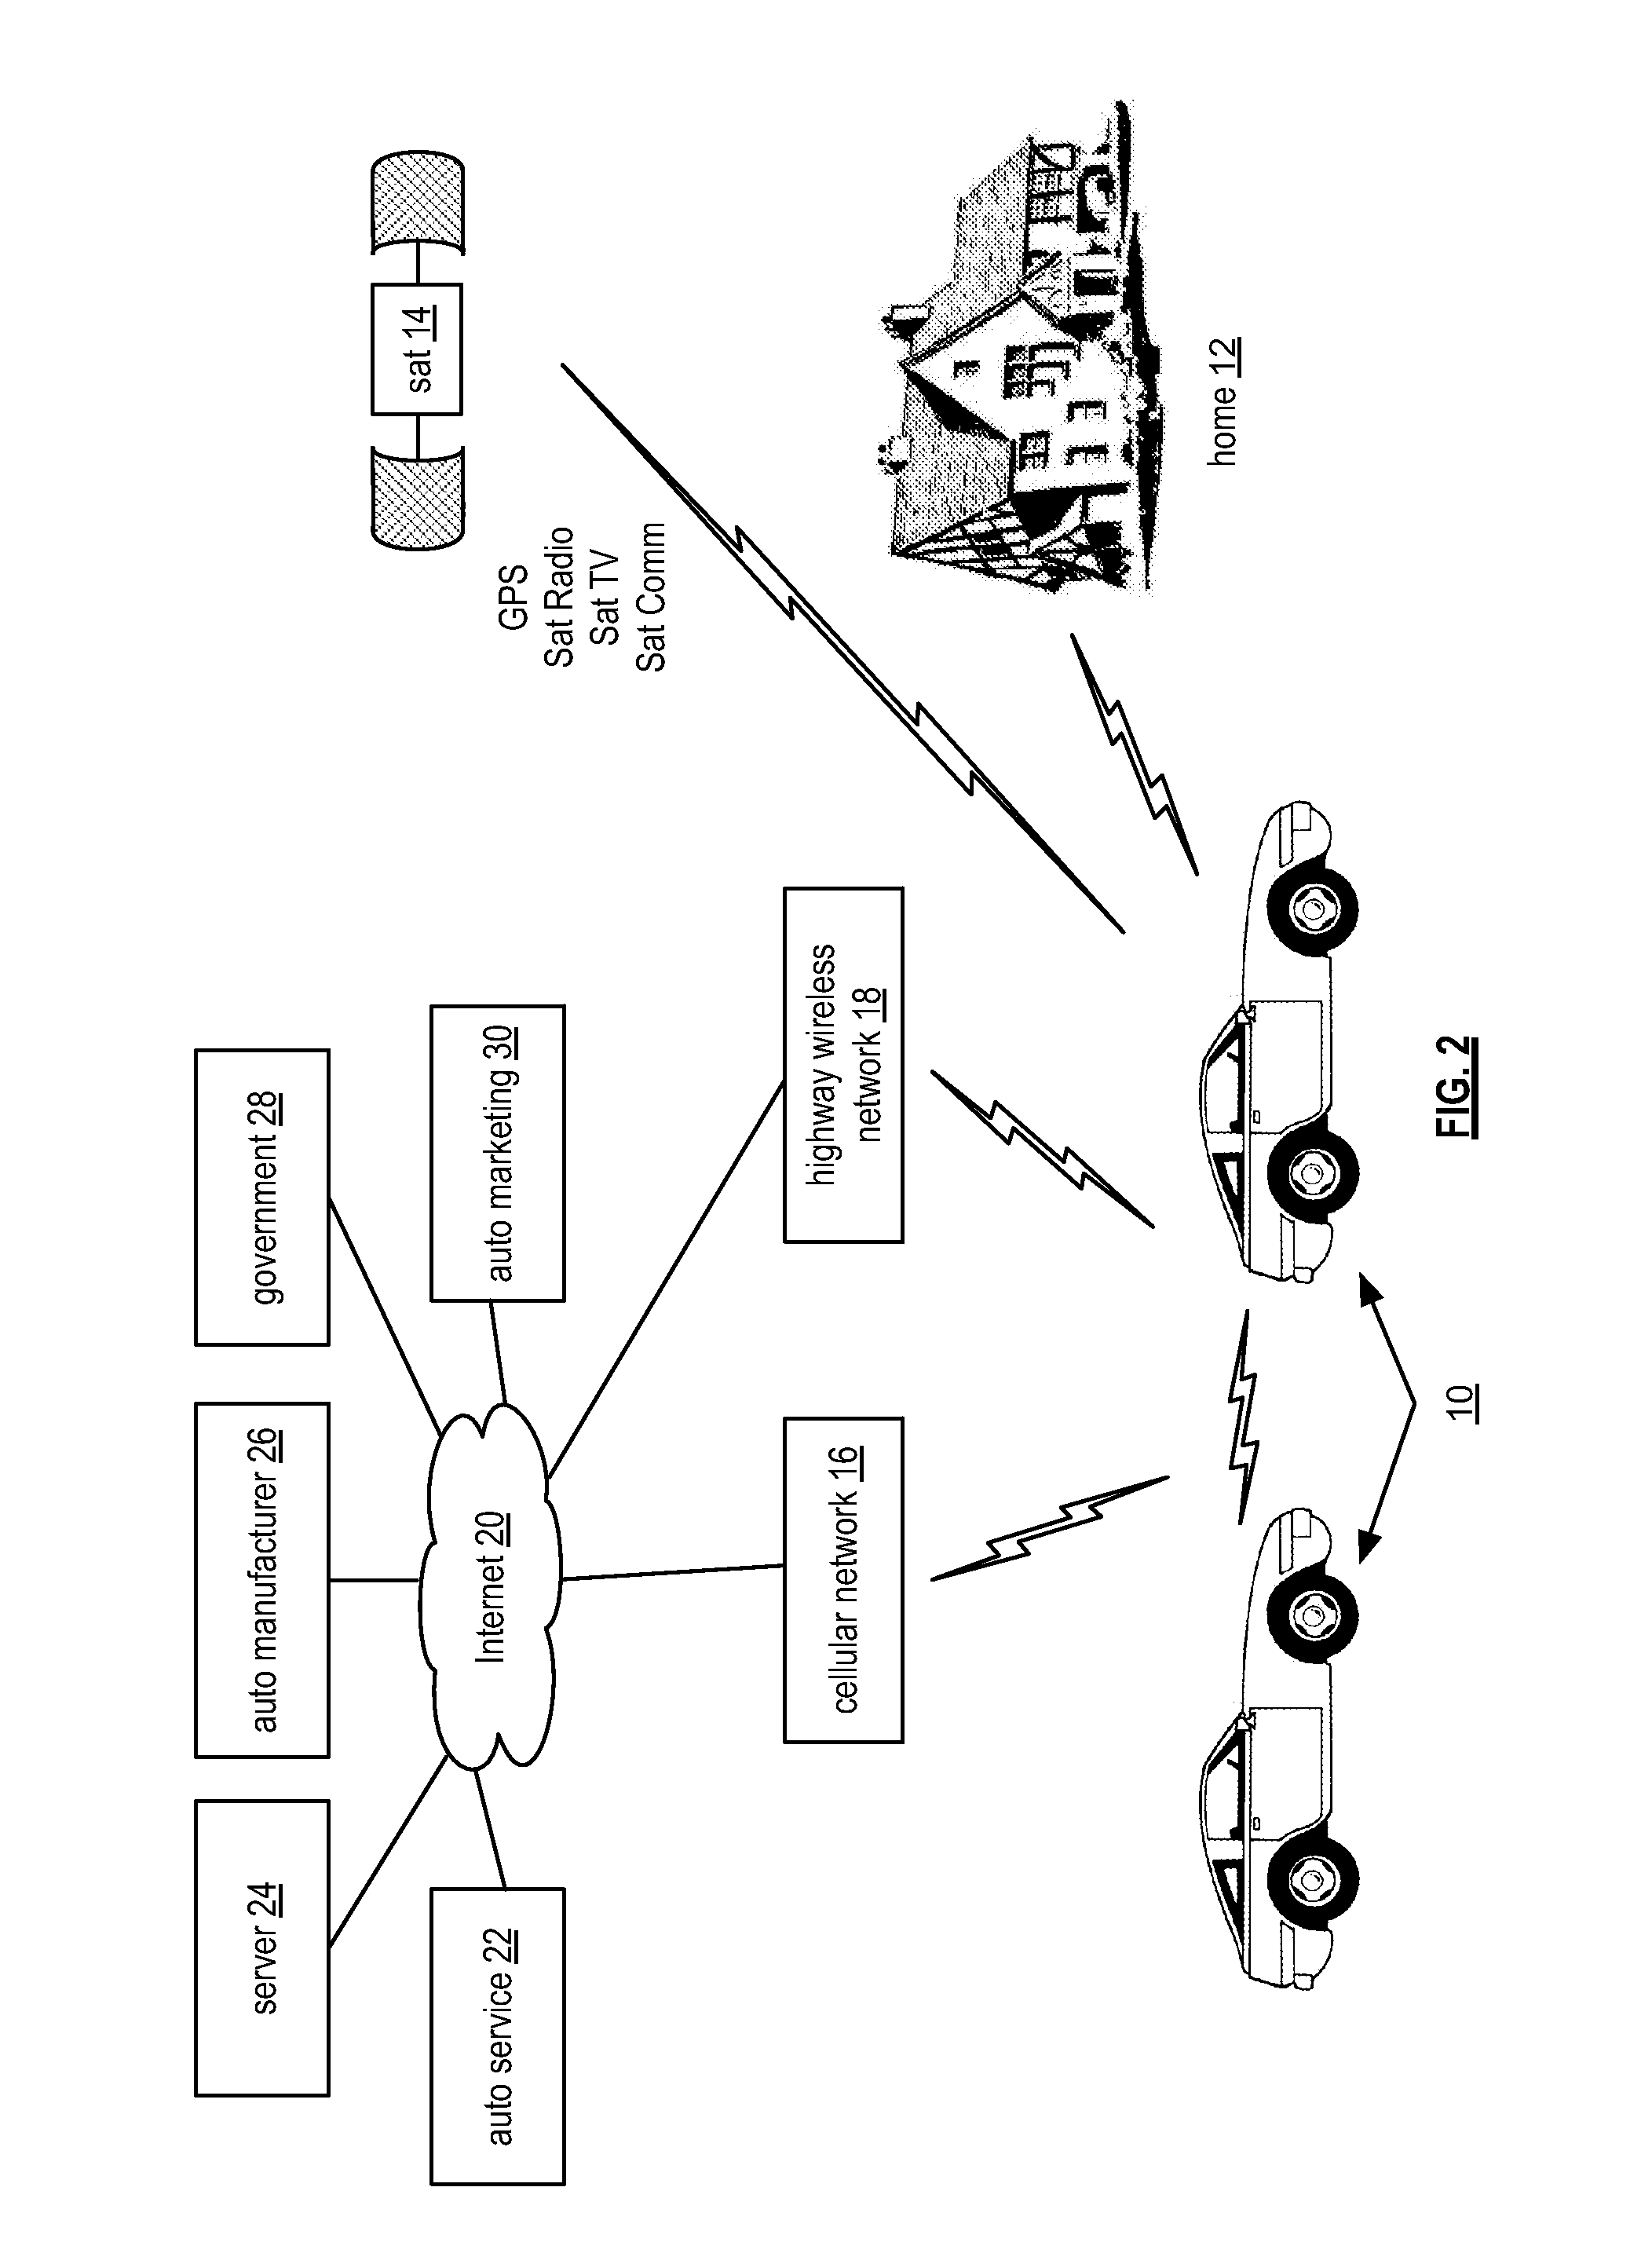 Power management within a vehicular communication network